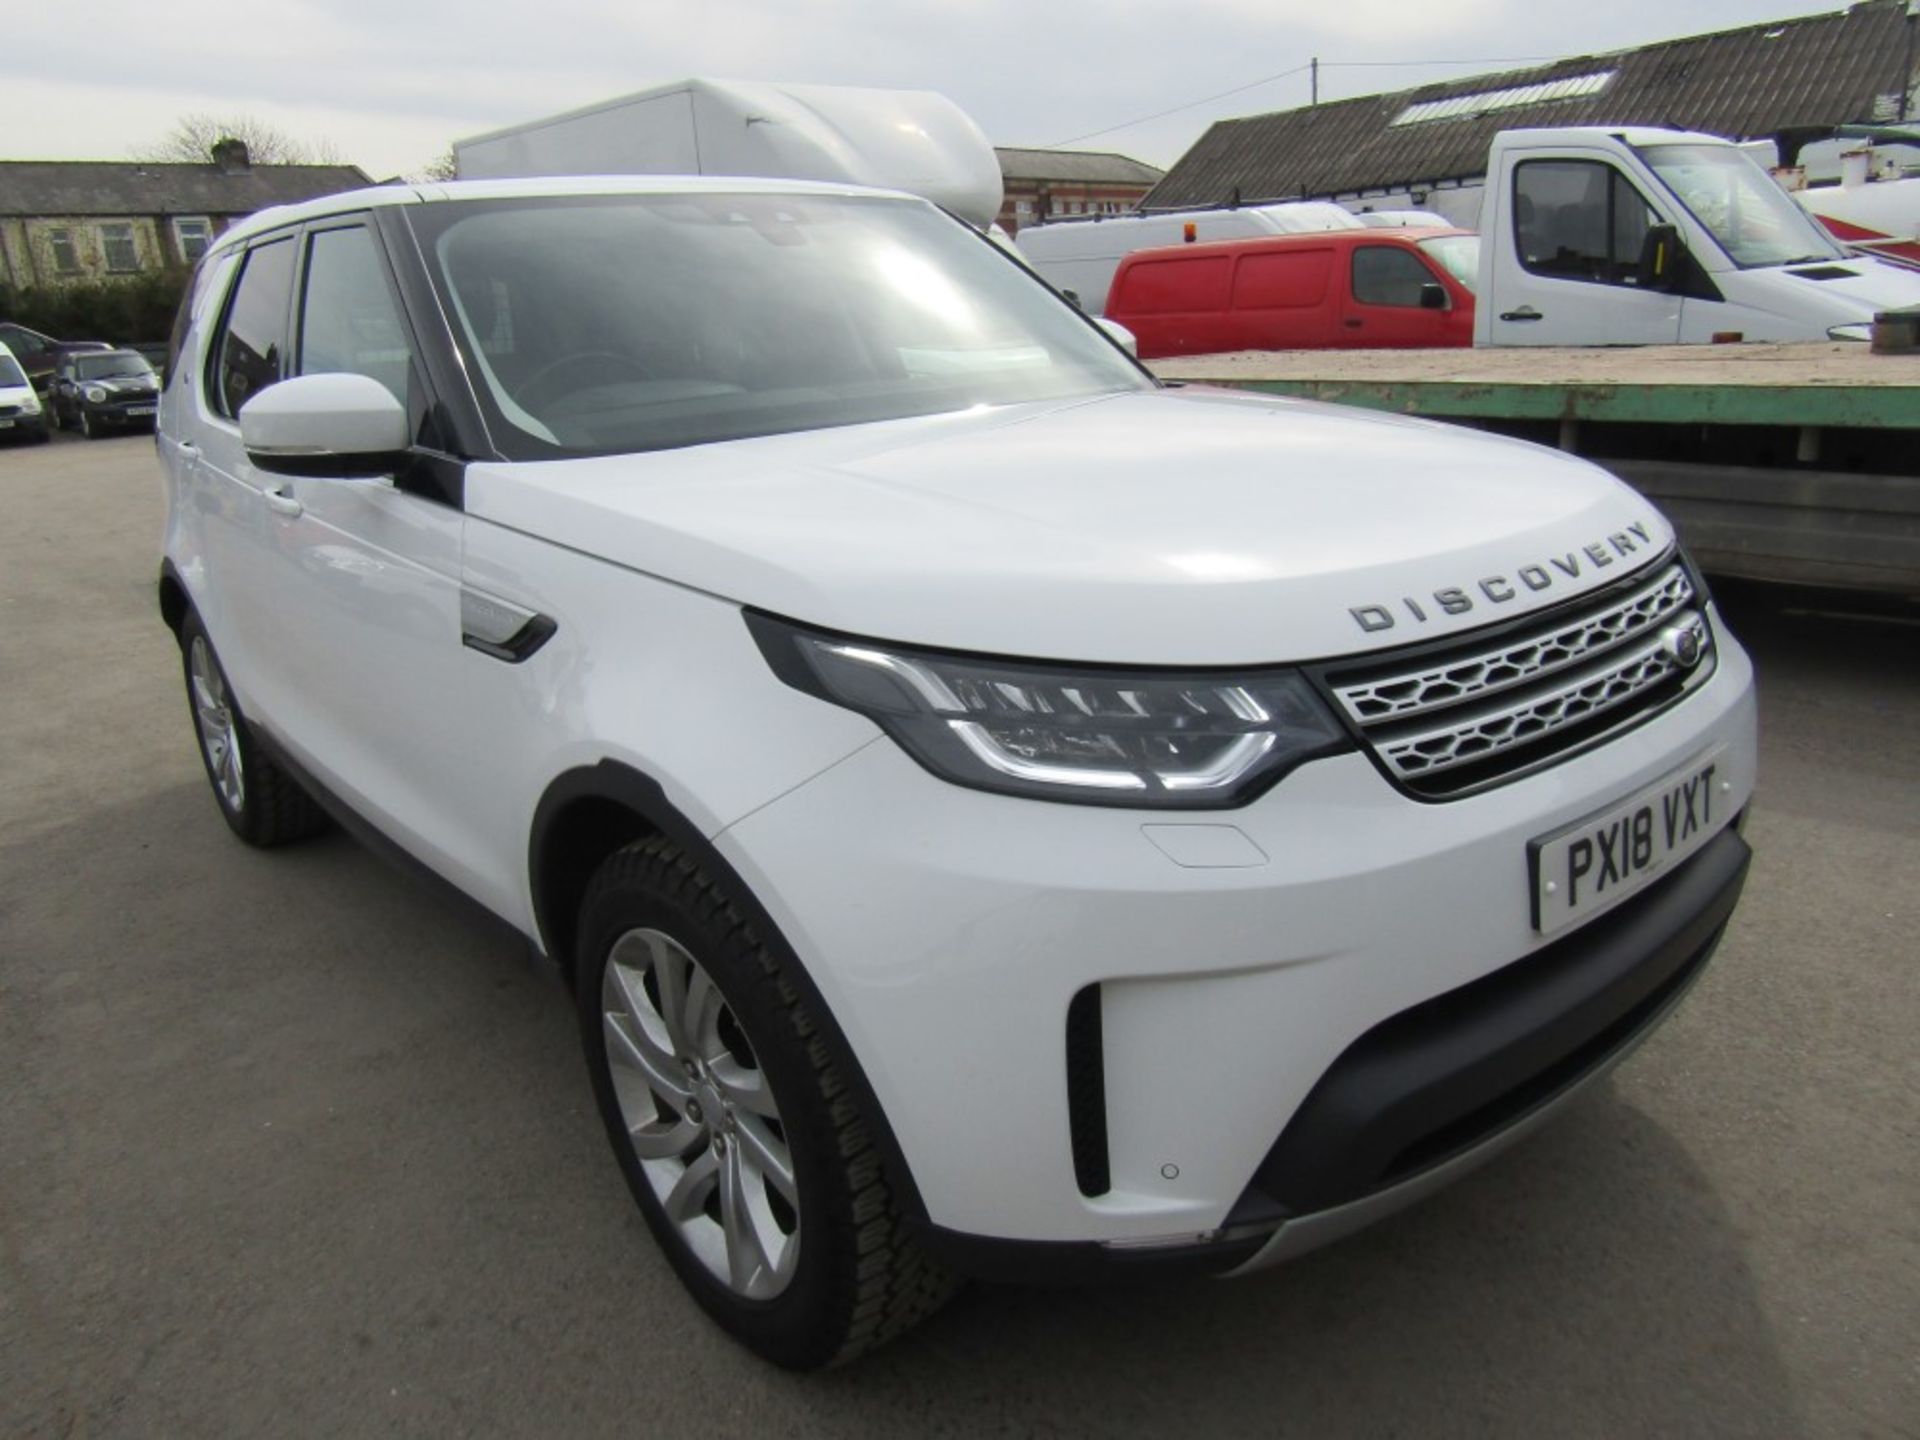 18 reg LAND ROVER DISCOVERY HSE TD6 AUTO 4 X 4, 1ST REG 03/18, TEST 04/23, 89762M WARRANTED, FSH, V5 - Image 2 of 8